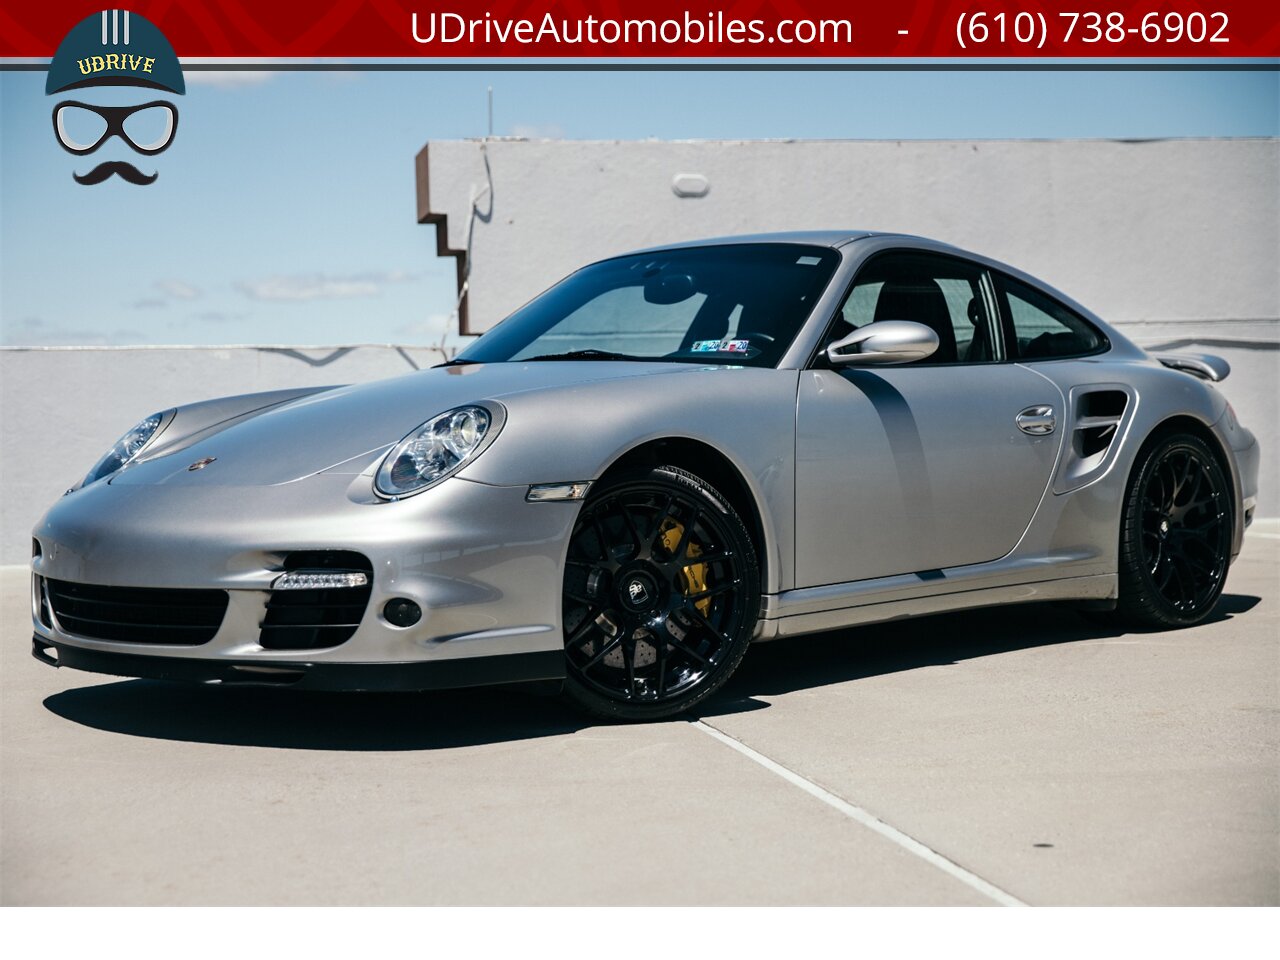 2008 Porsche 911 6 Speed Manual Turbo 997 PCCB's $149k MSRP   - Photo 1 - West Chester, PA 19382